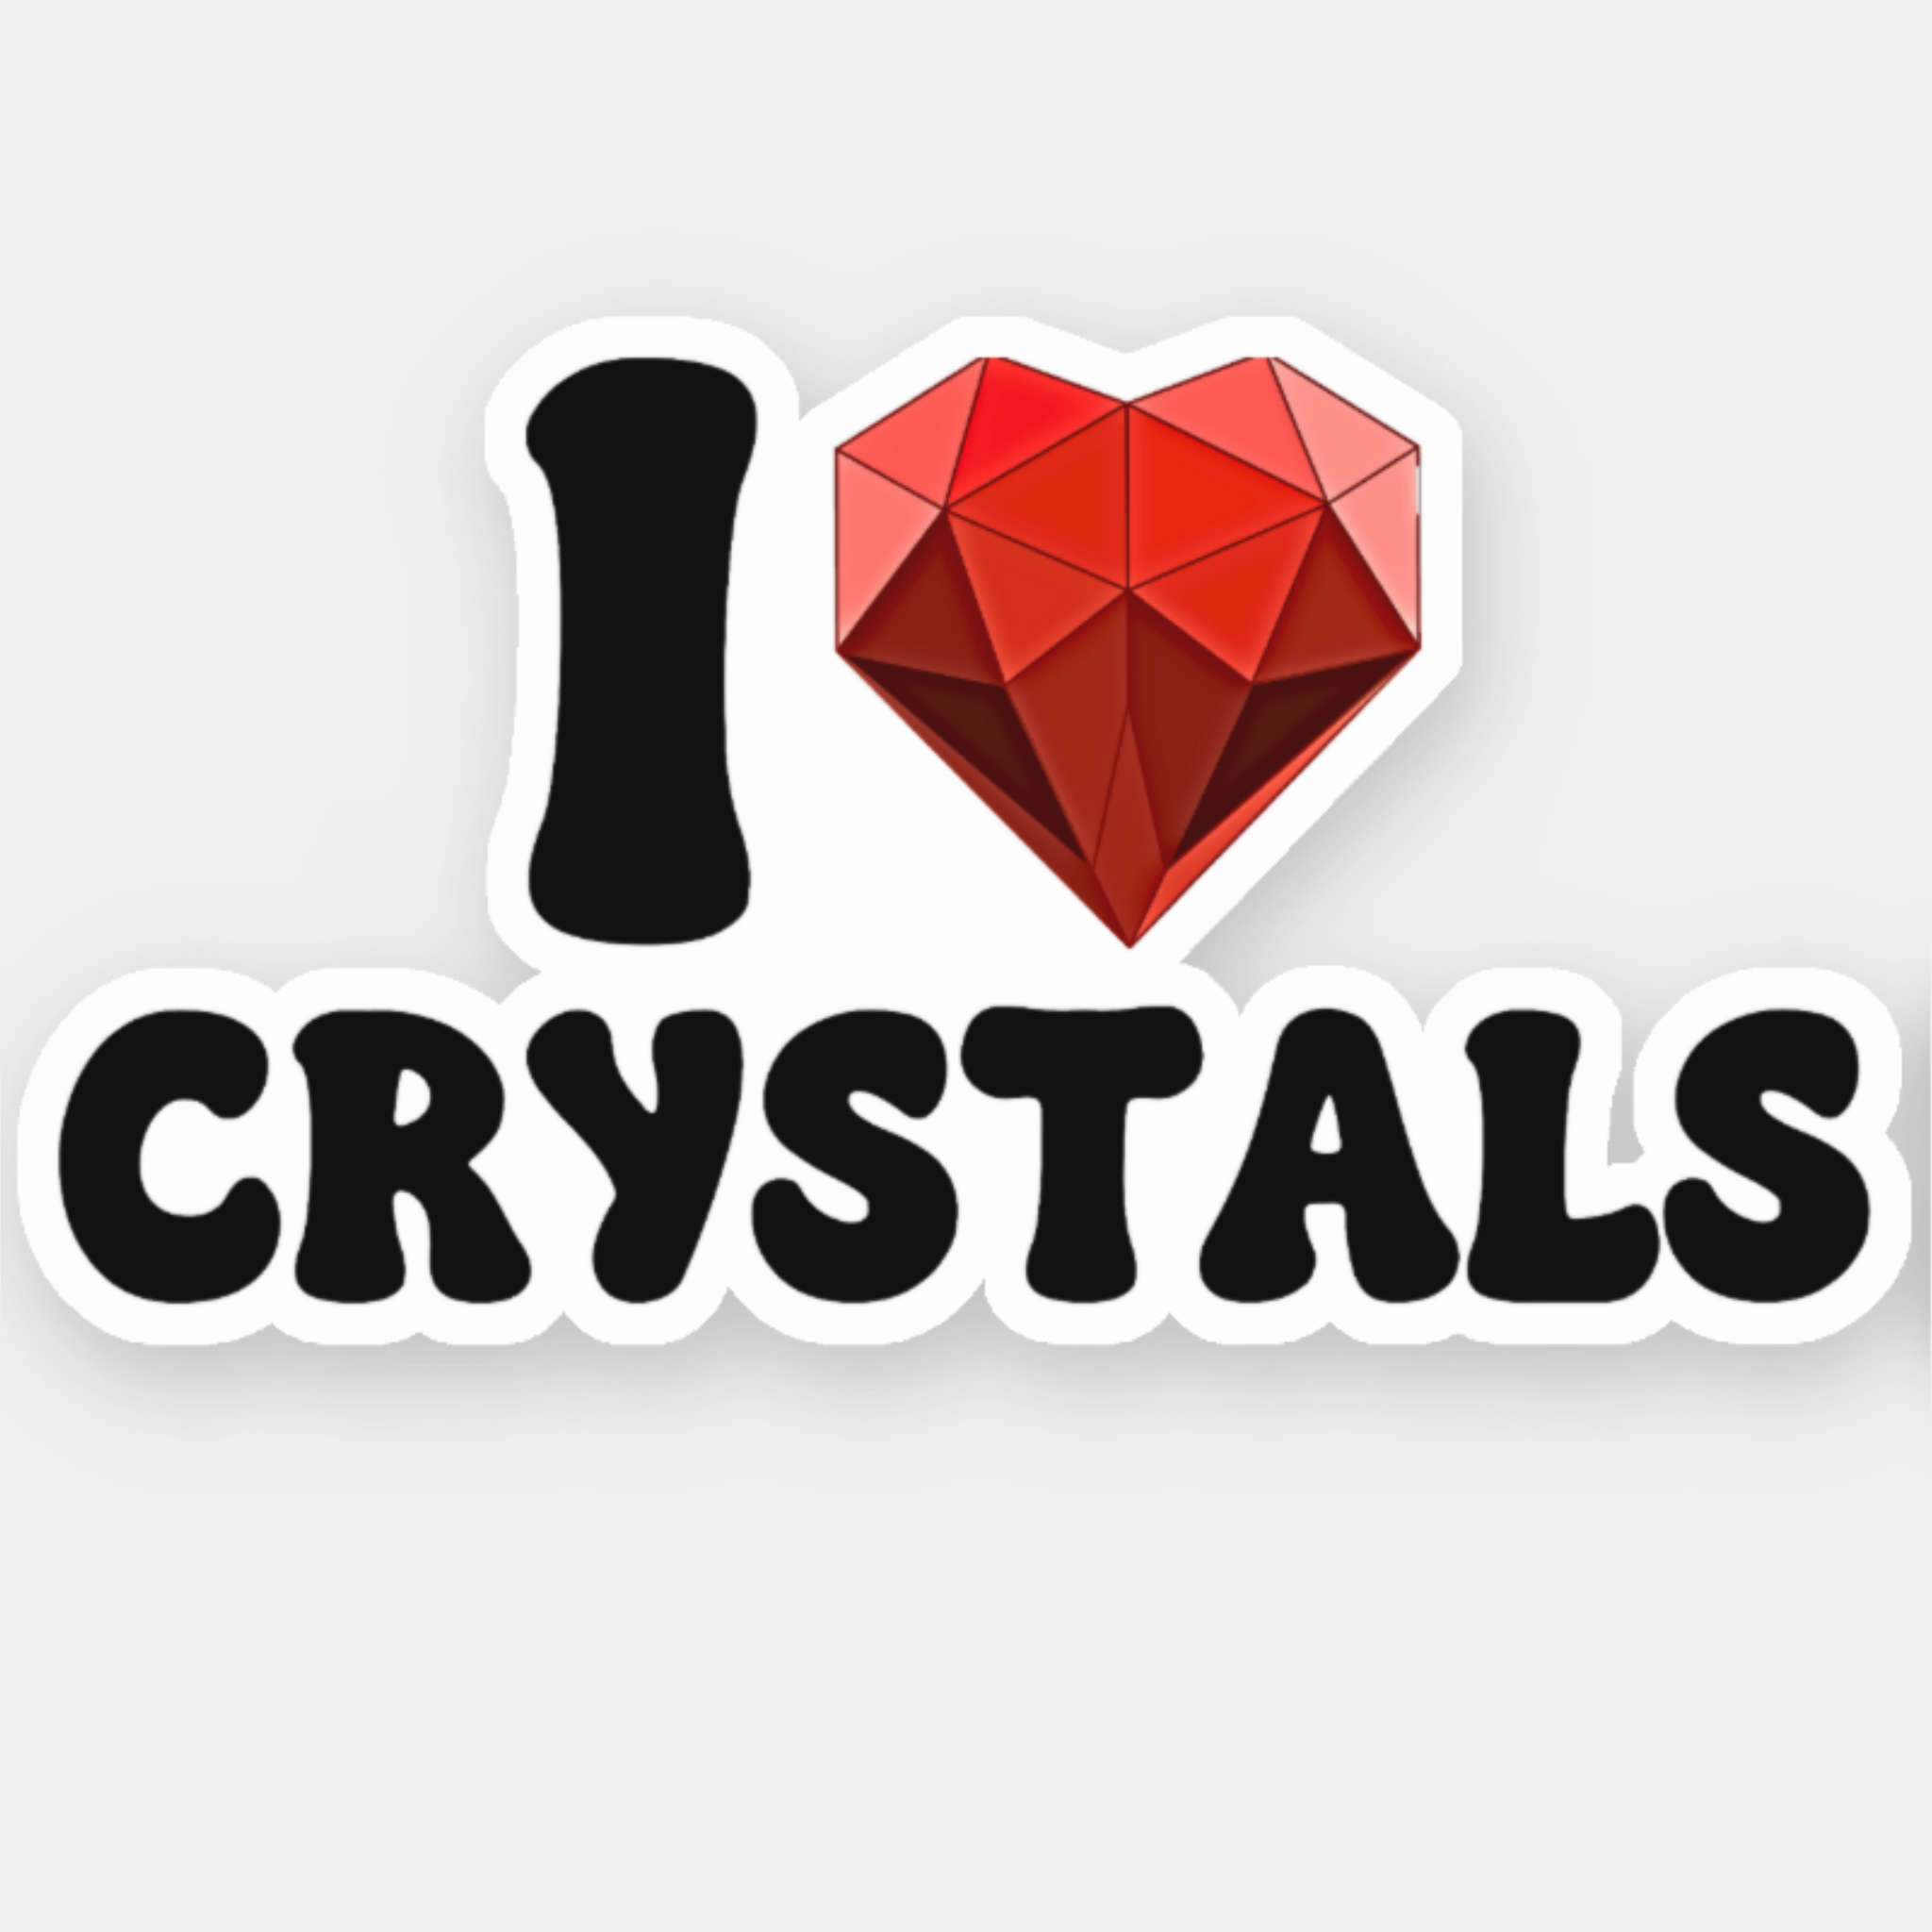 I HEART CRYSTALS Valentine's Day for Crystal Lovers! I LOVE CRYSTALS